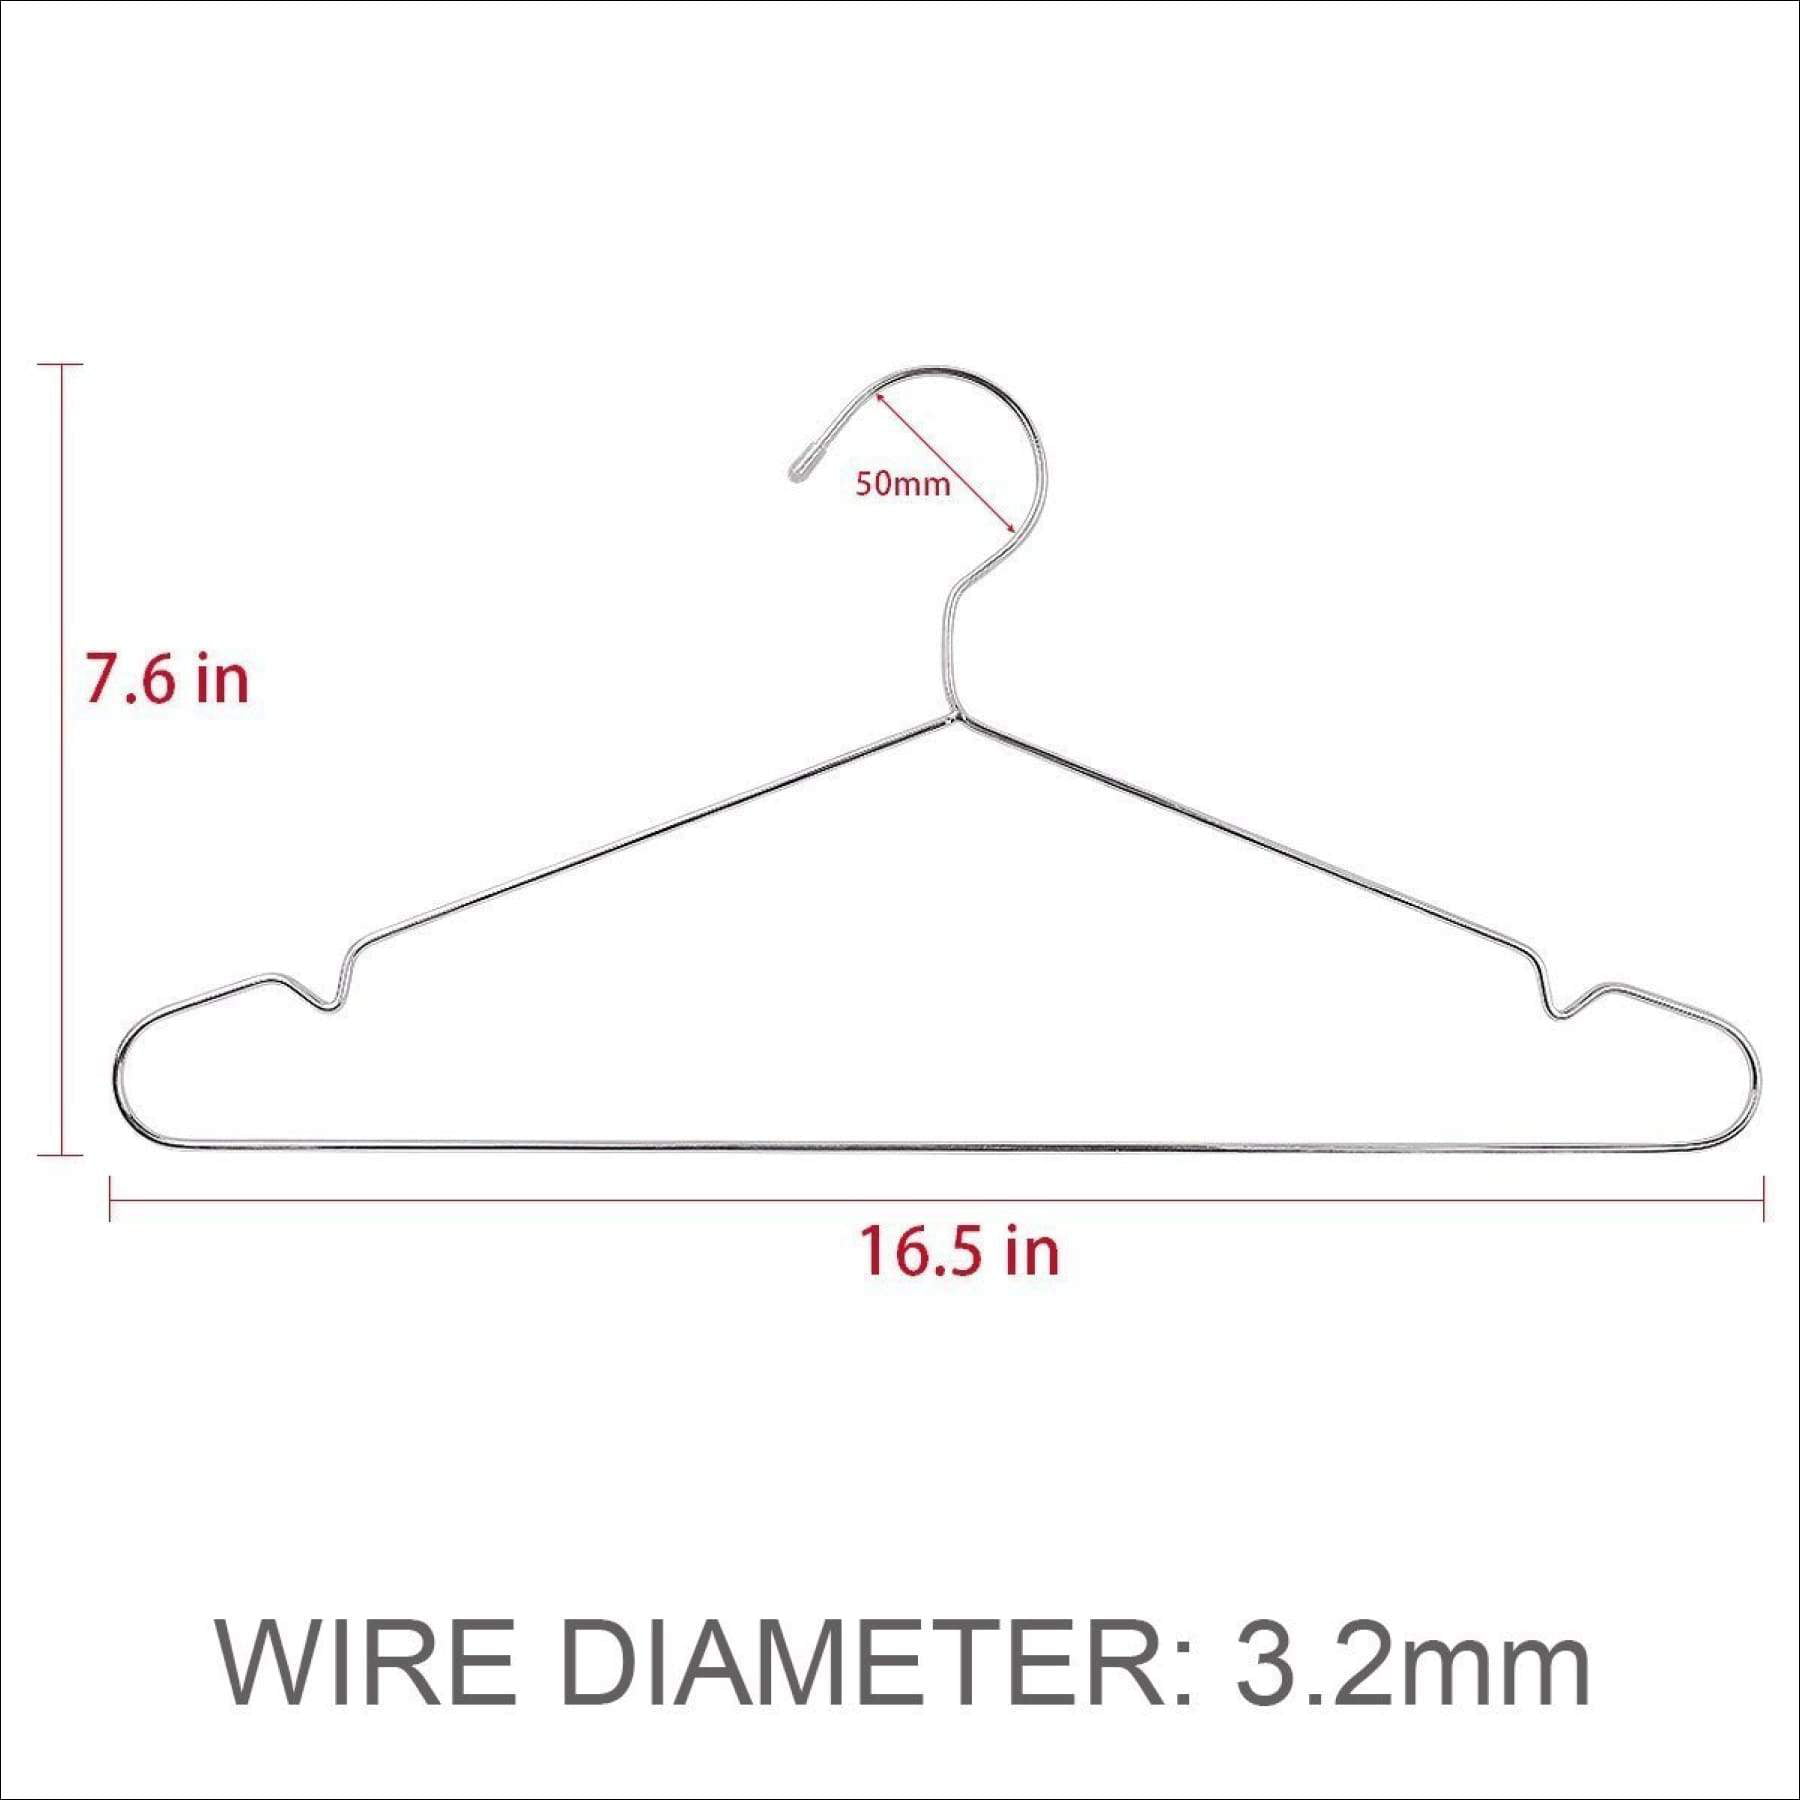 Timmy TIMMY Wire Hangers 50 Pack Coat Hangers Strong Heavy Duty Stainless  Steel Metal Hangers 16.5 Inch Ultra Thin Space Saving